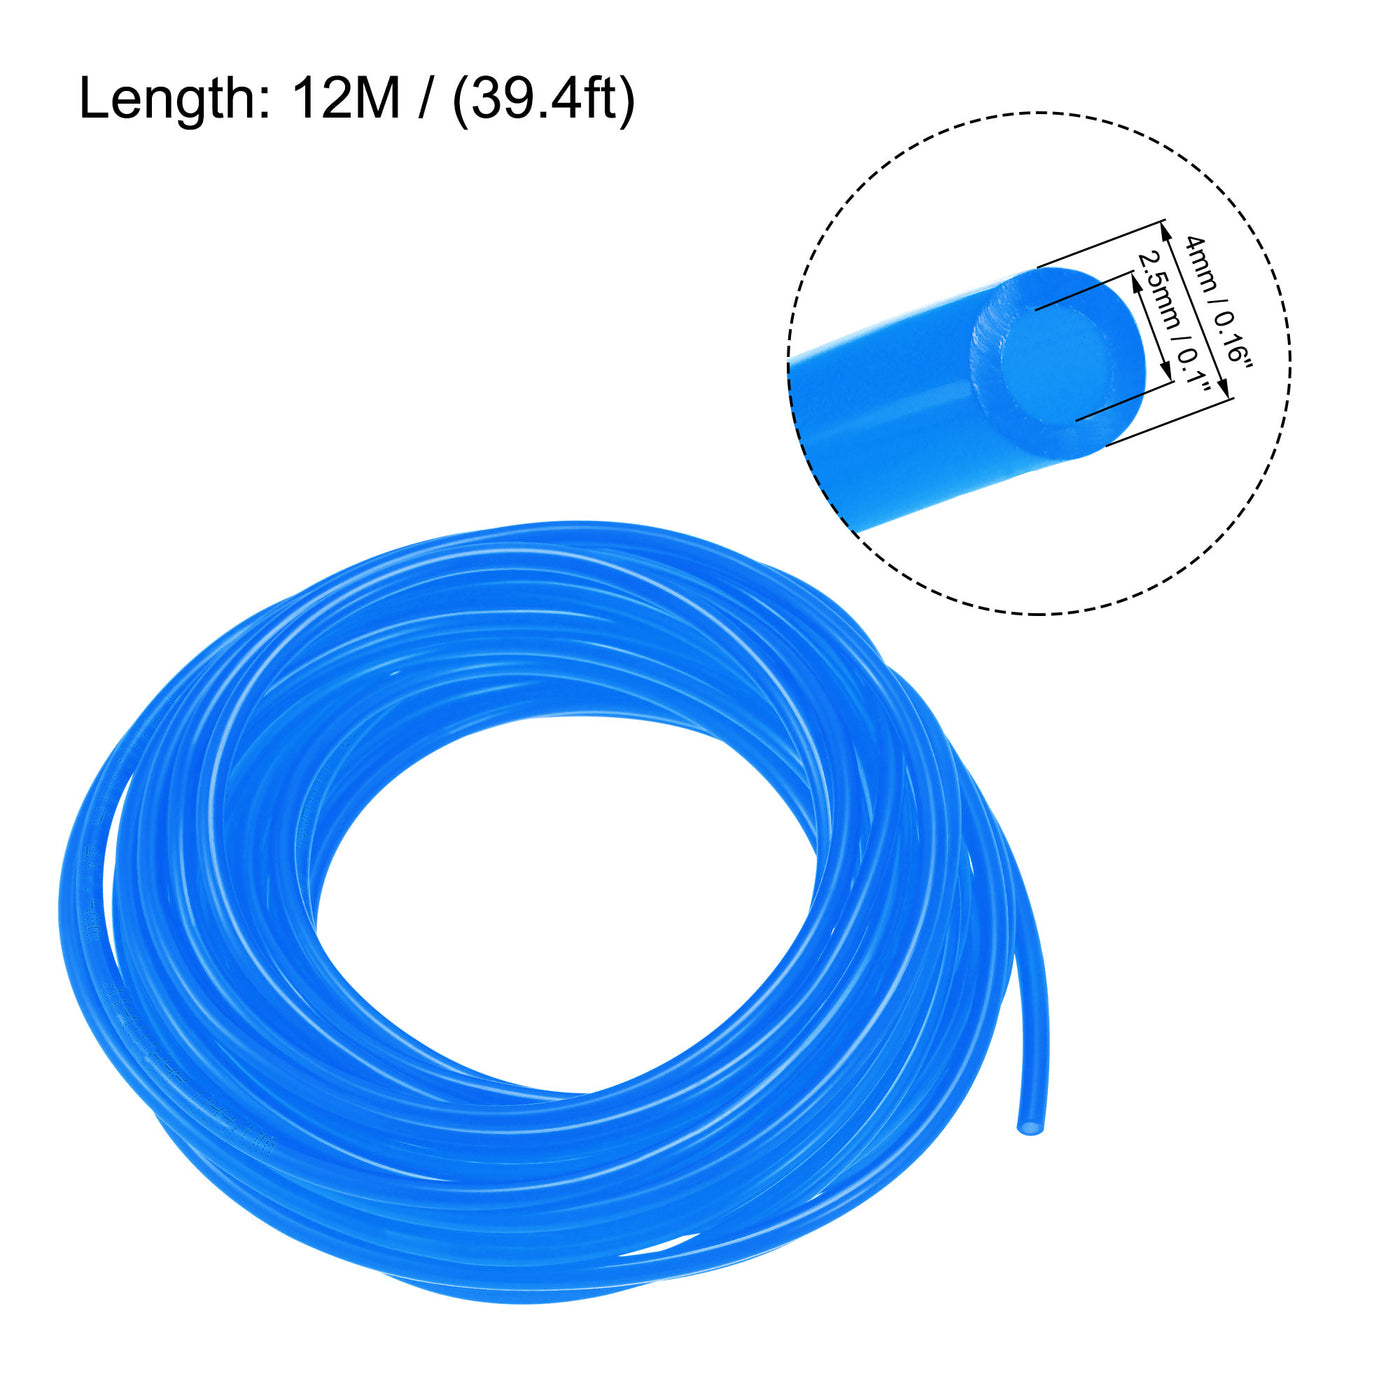 uxcell Uxcell Pneumatic Air Hose Tubing Air Compressor Tube 2.5mm/0.1''ID x 4mm/0.16''OD x 12m/39.4Ft Polyurethane Pipe Blue